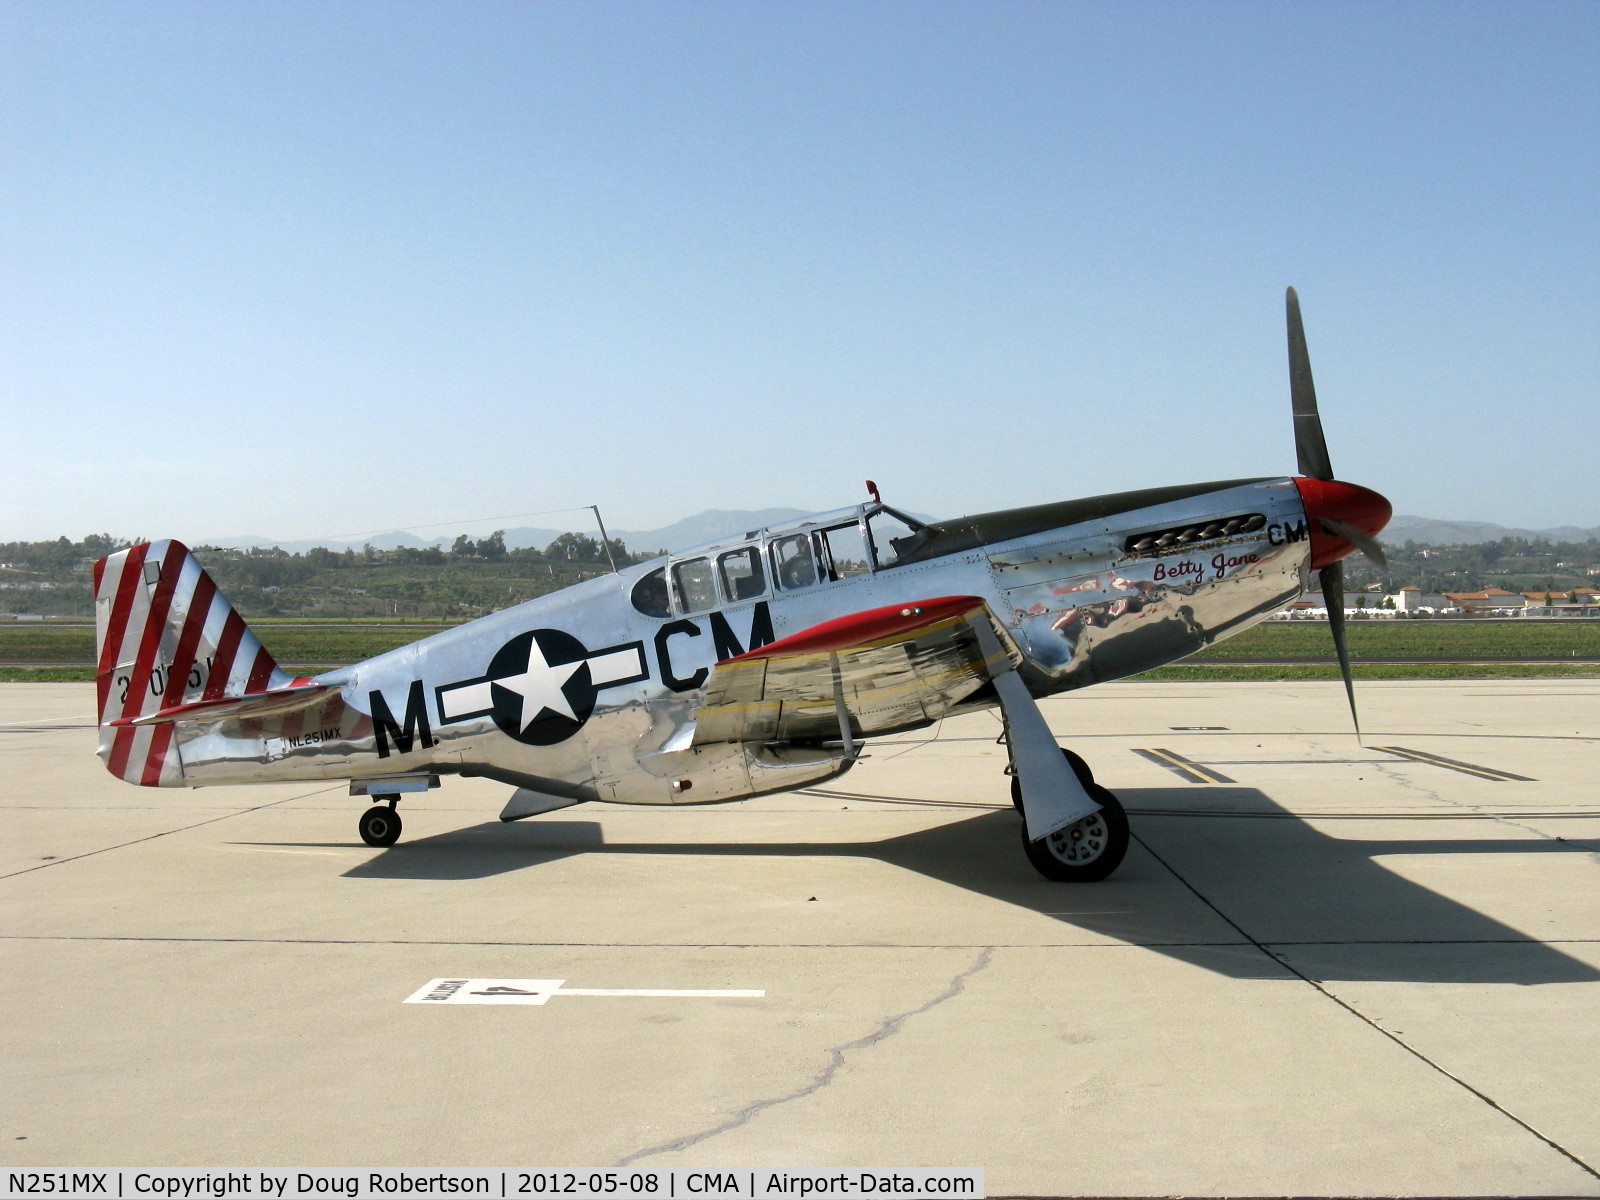 N251MX, 1943 North American P-51C-10 Mustang C/N 103-22730, 1943 North American TP-51C-10 MUSTANG 'Betty Jane', Packard Liberty/RR V-1650-3 1,380 Hp, mod. for tandem dual control, World's SOLE REMAINING EXAMPLE of just five TP-51Cs built. Engine shutdown